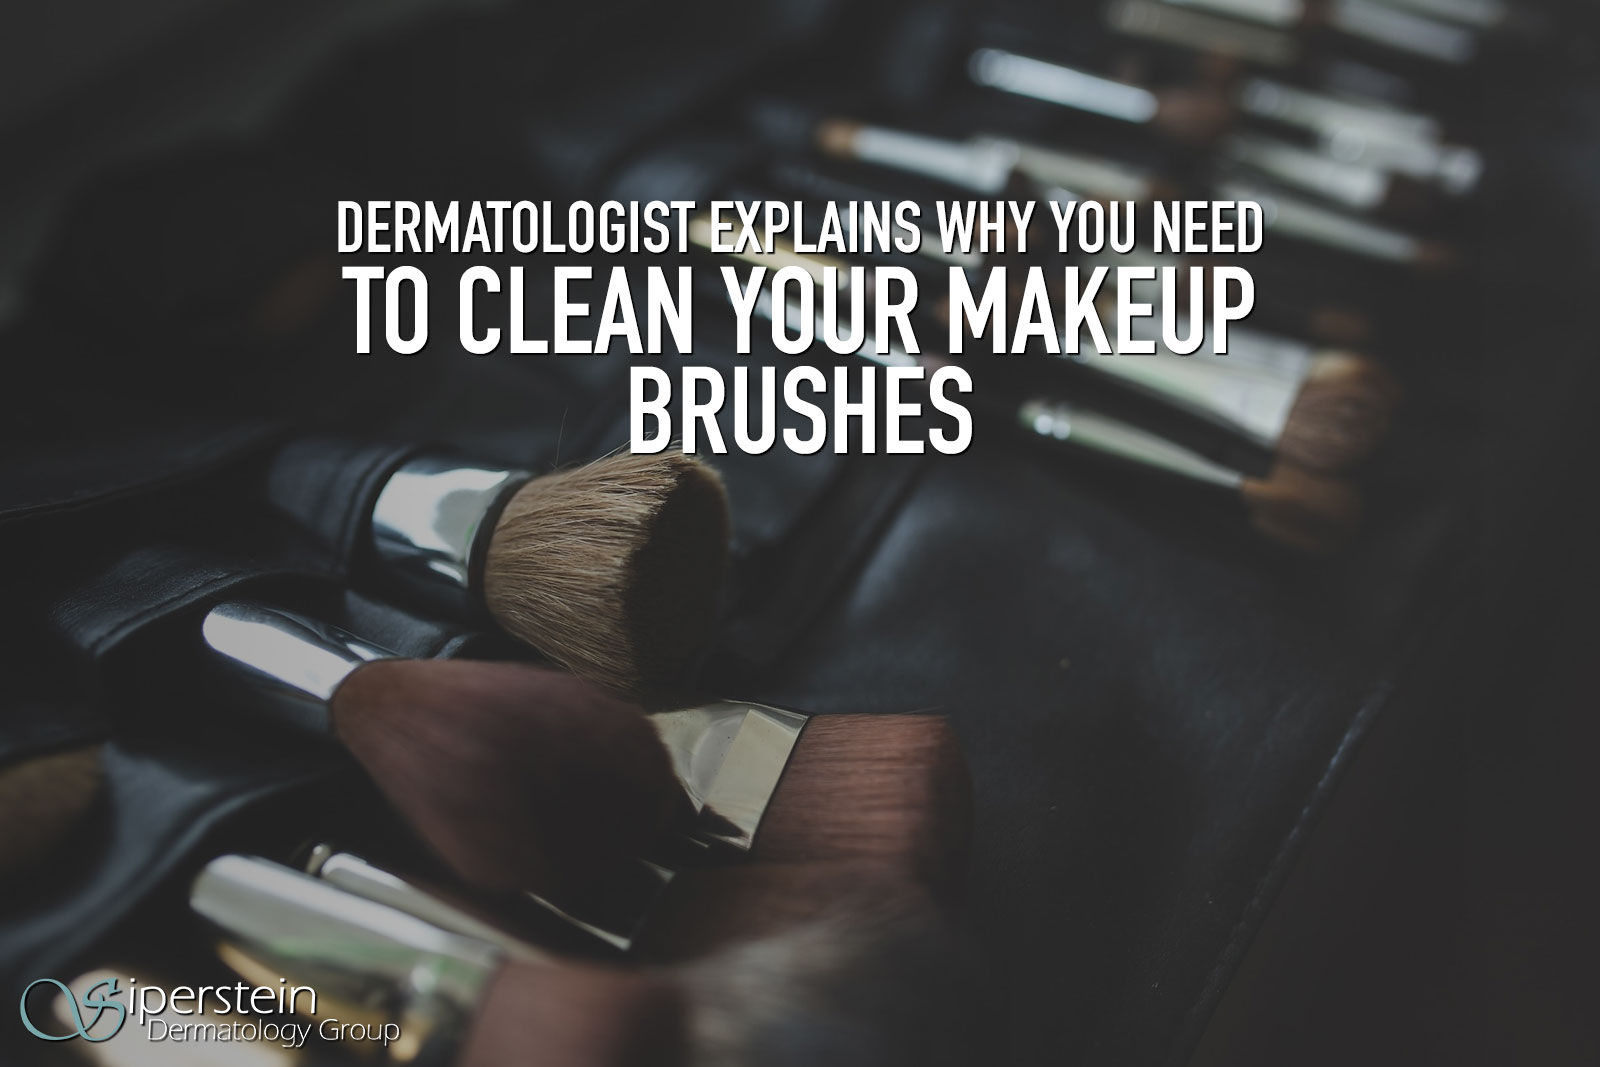 https://www.sipderm.com/wp-content/uploads/2019/08/Clean-Your-Makeup-Brushes.jpg